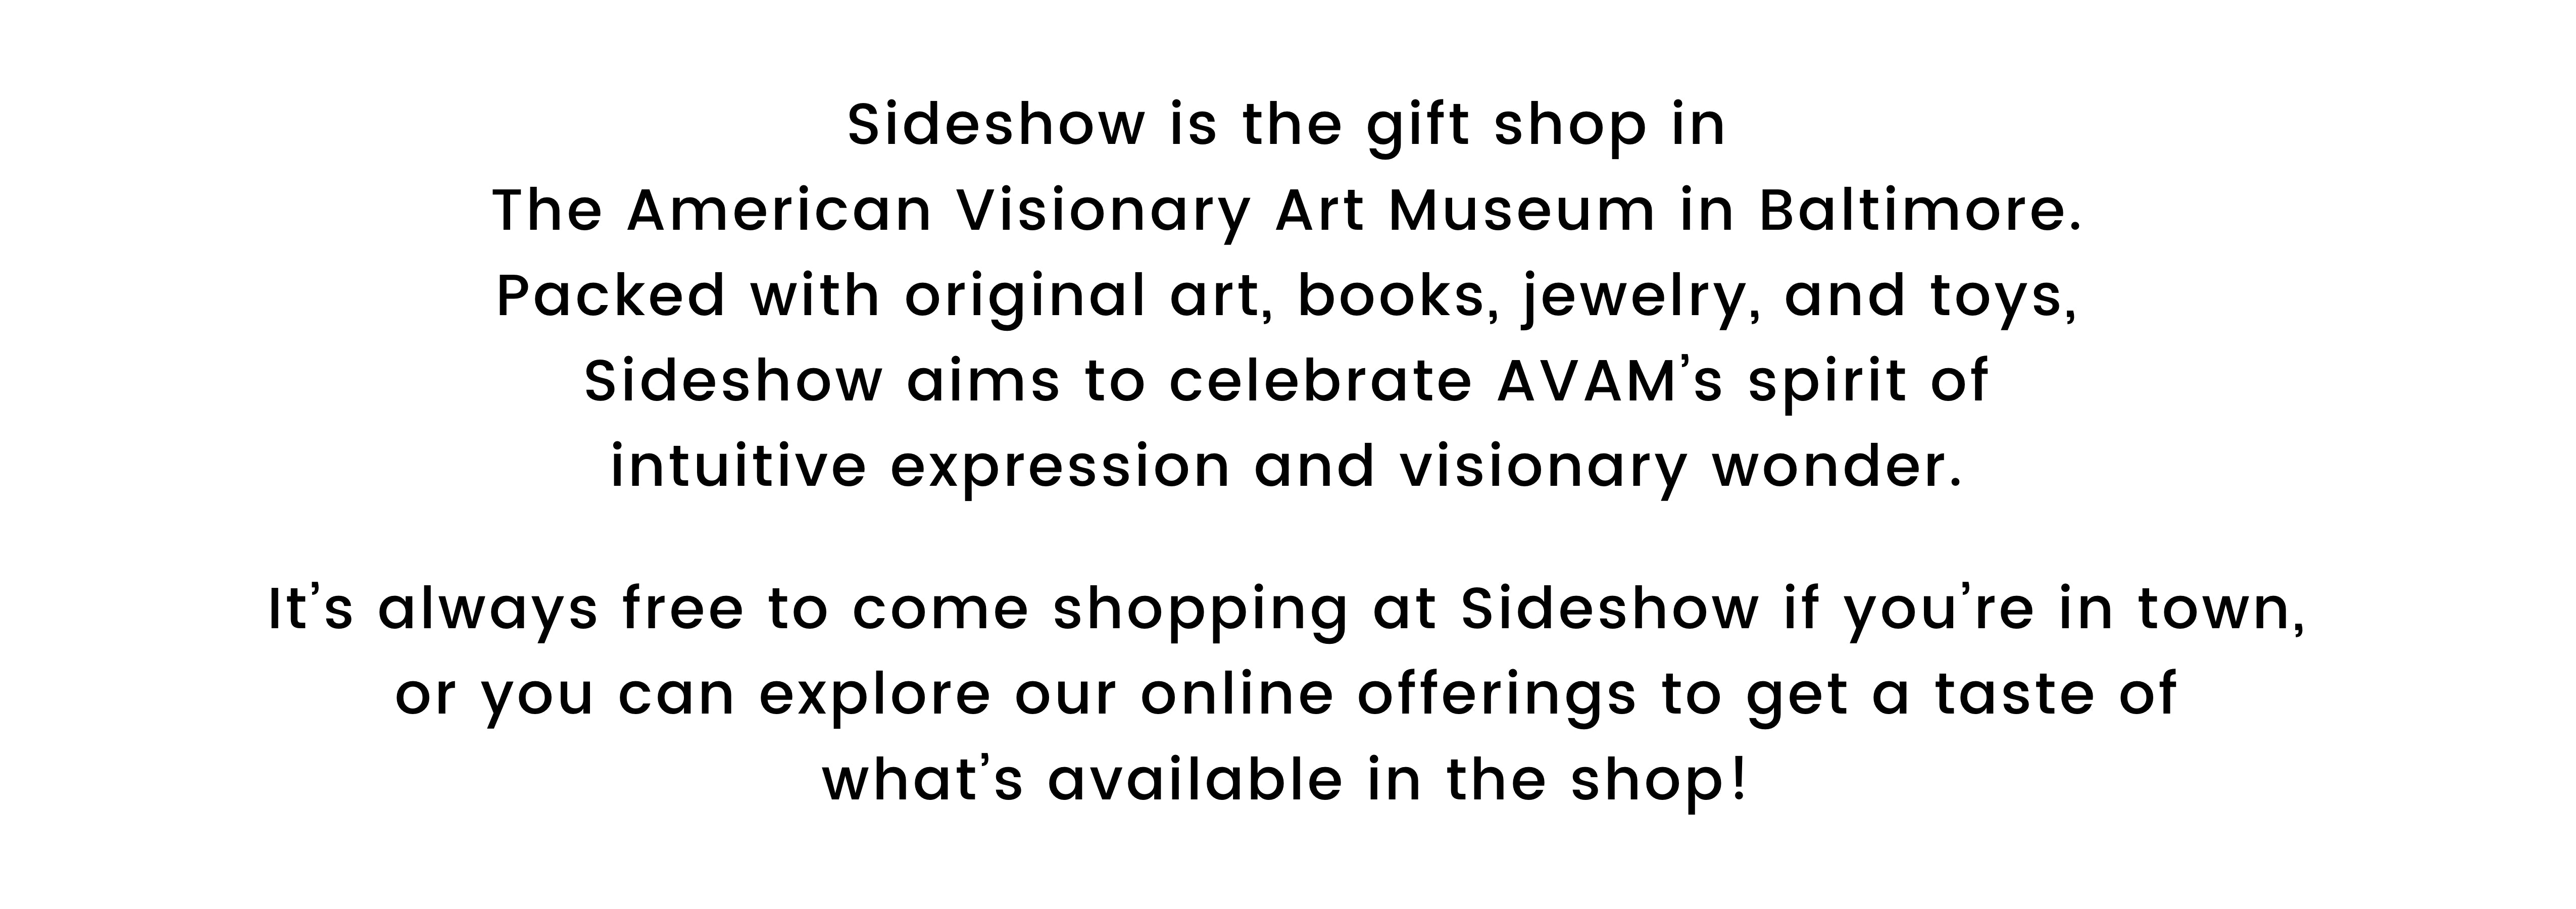 Sideshow is the gift shop in The American Visionary Art Museum in Baltimore. Packed with original art, books, jewelry, and toys, Sideshow aims to celebrate AVAM’s spirit of intuitive expression and visionary wonder. It’s always free to come shopping at Sideshow if you’re in town, or you can explore our online offerings to get a taste of what’s available in the shop!